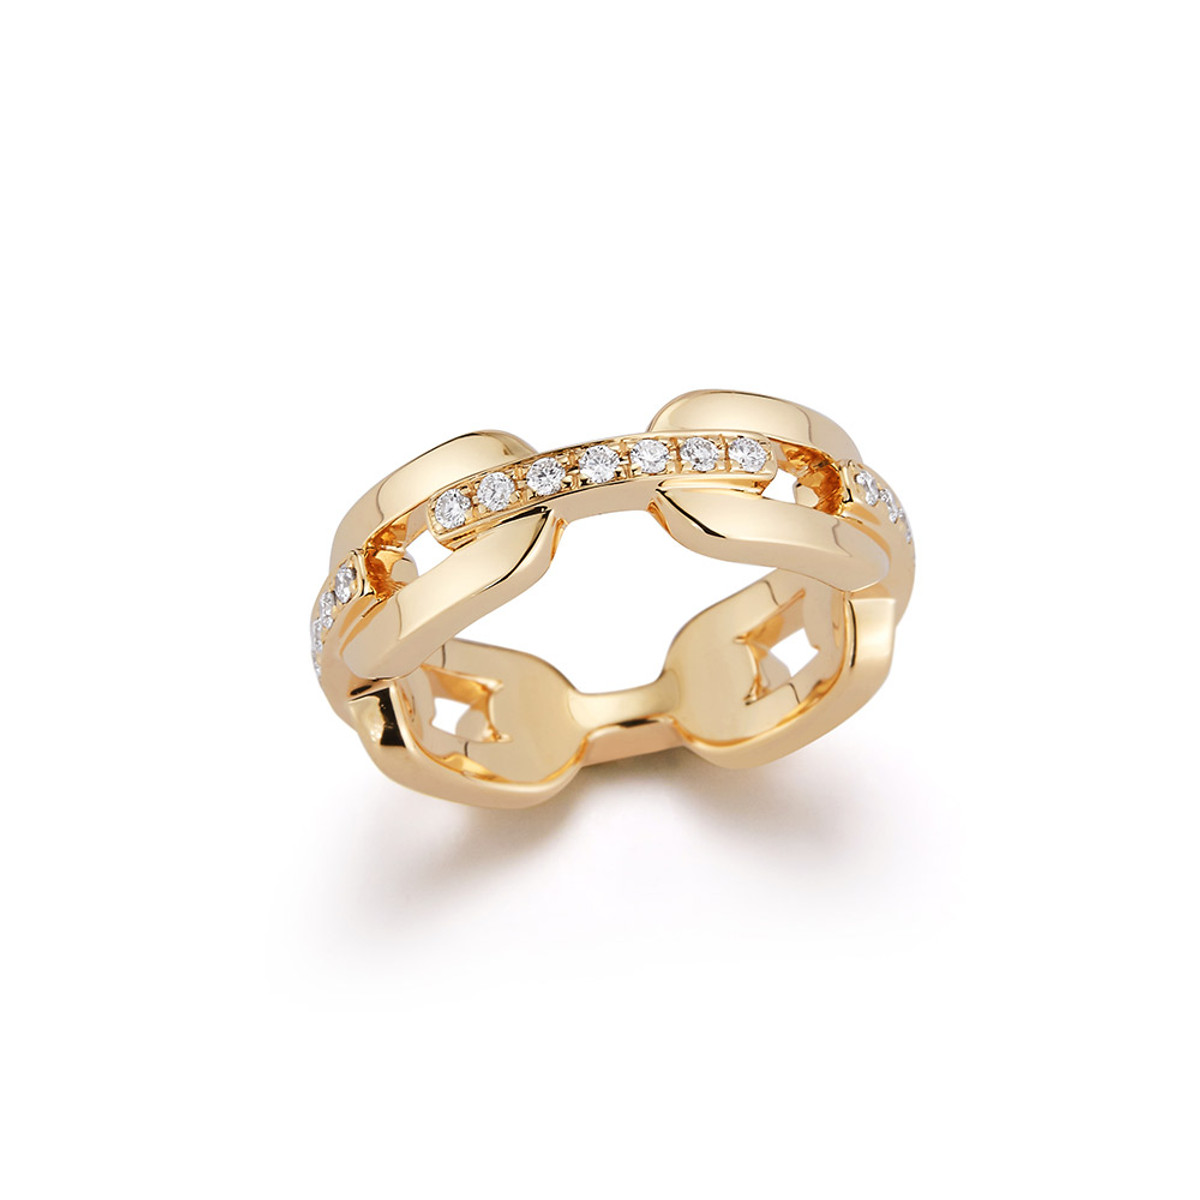 Walters Faith Saxon 18K Yellow Gold and Diamond Bar Flat Chain Link Ring-62277 Product Image